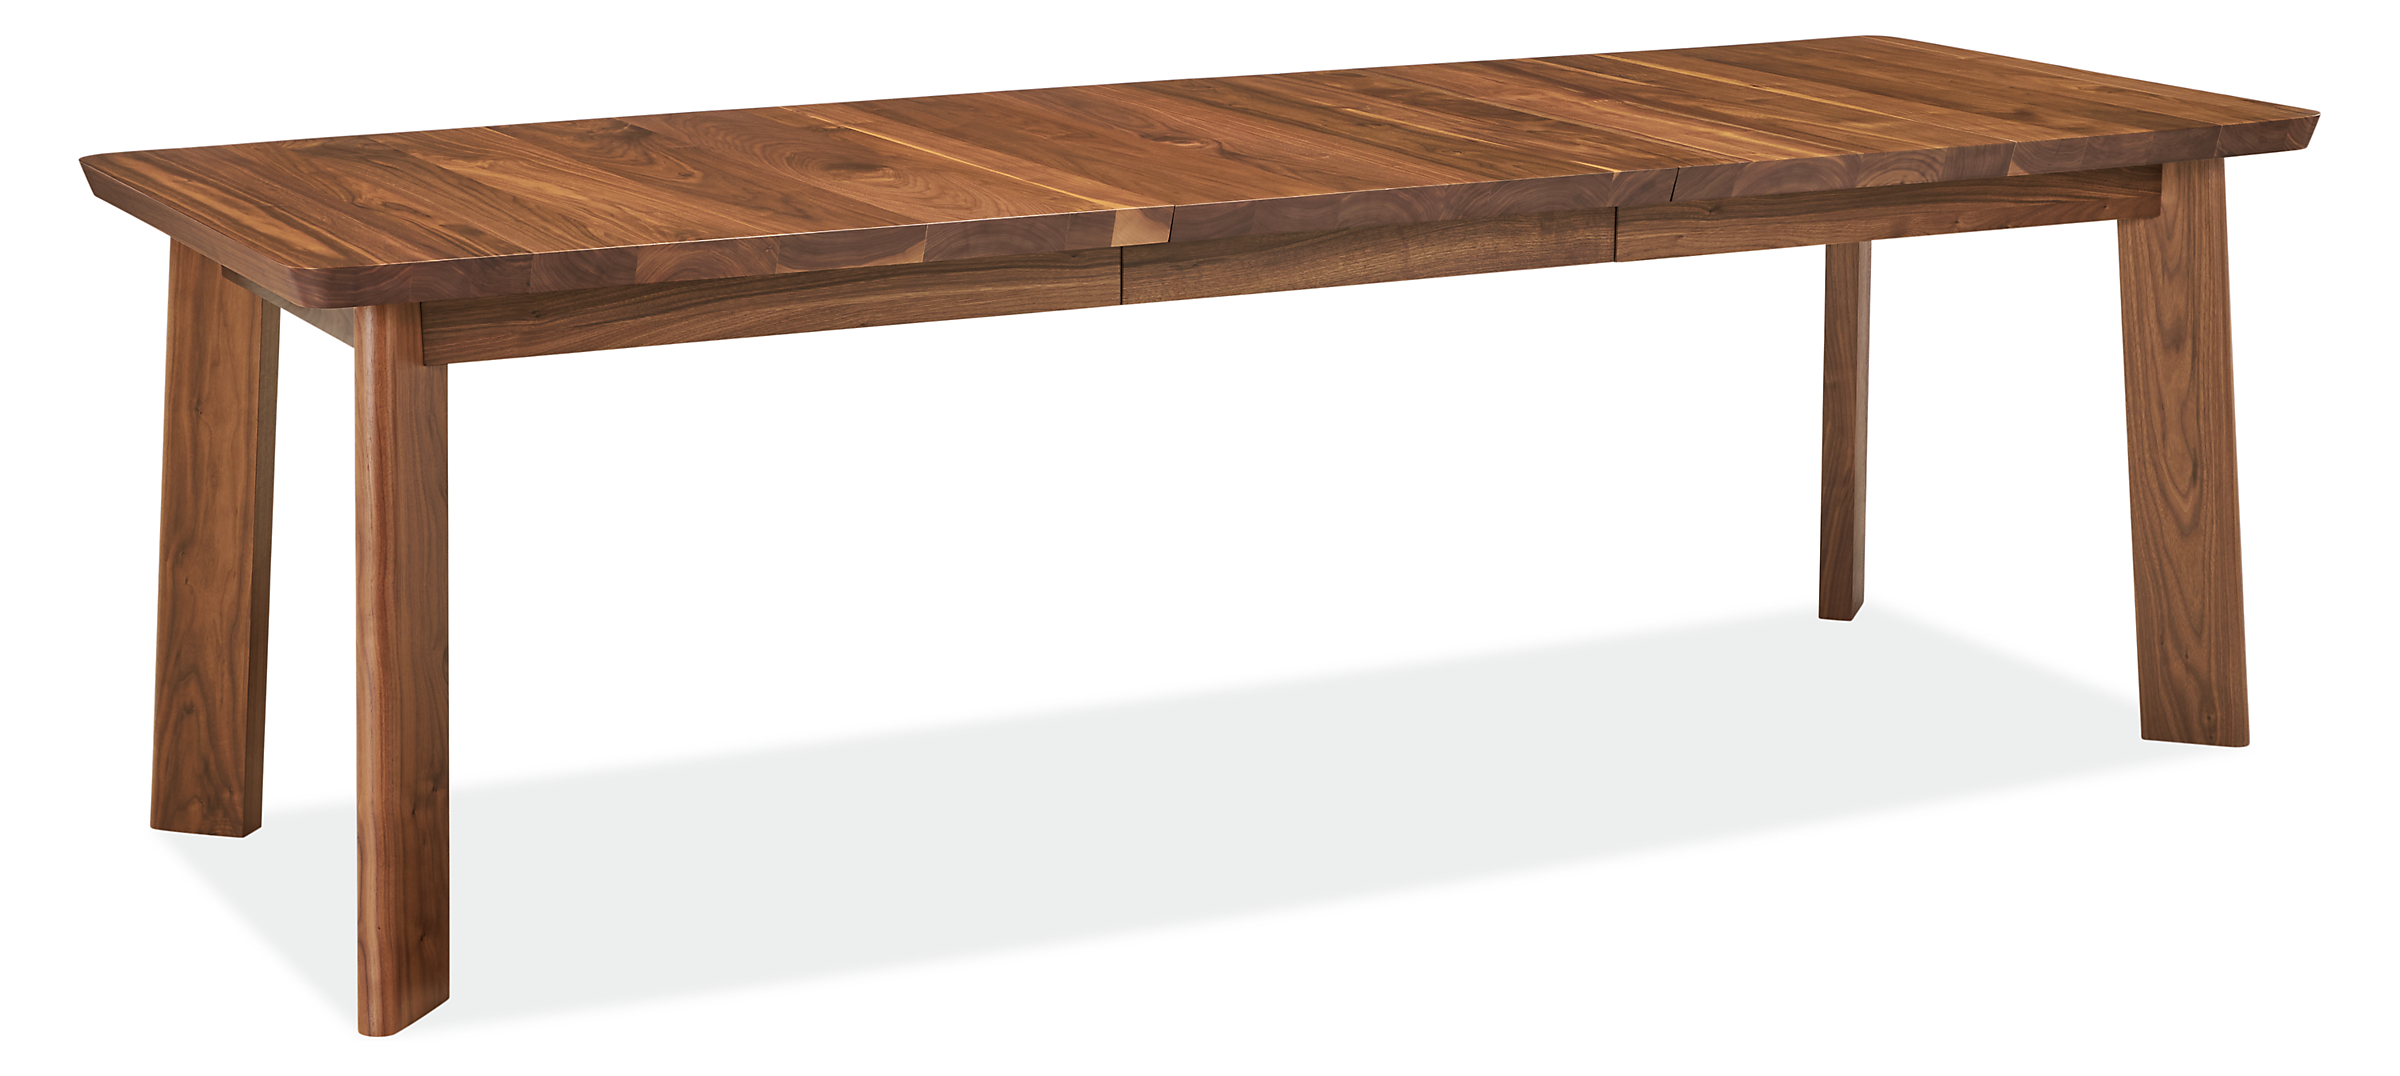 detail of walnut colby extension table with leaf extended